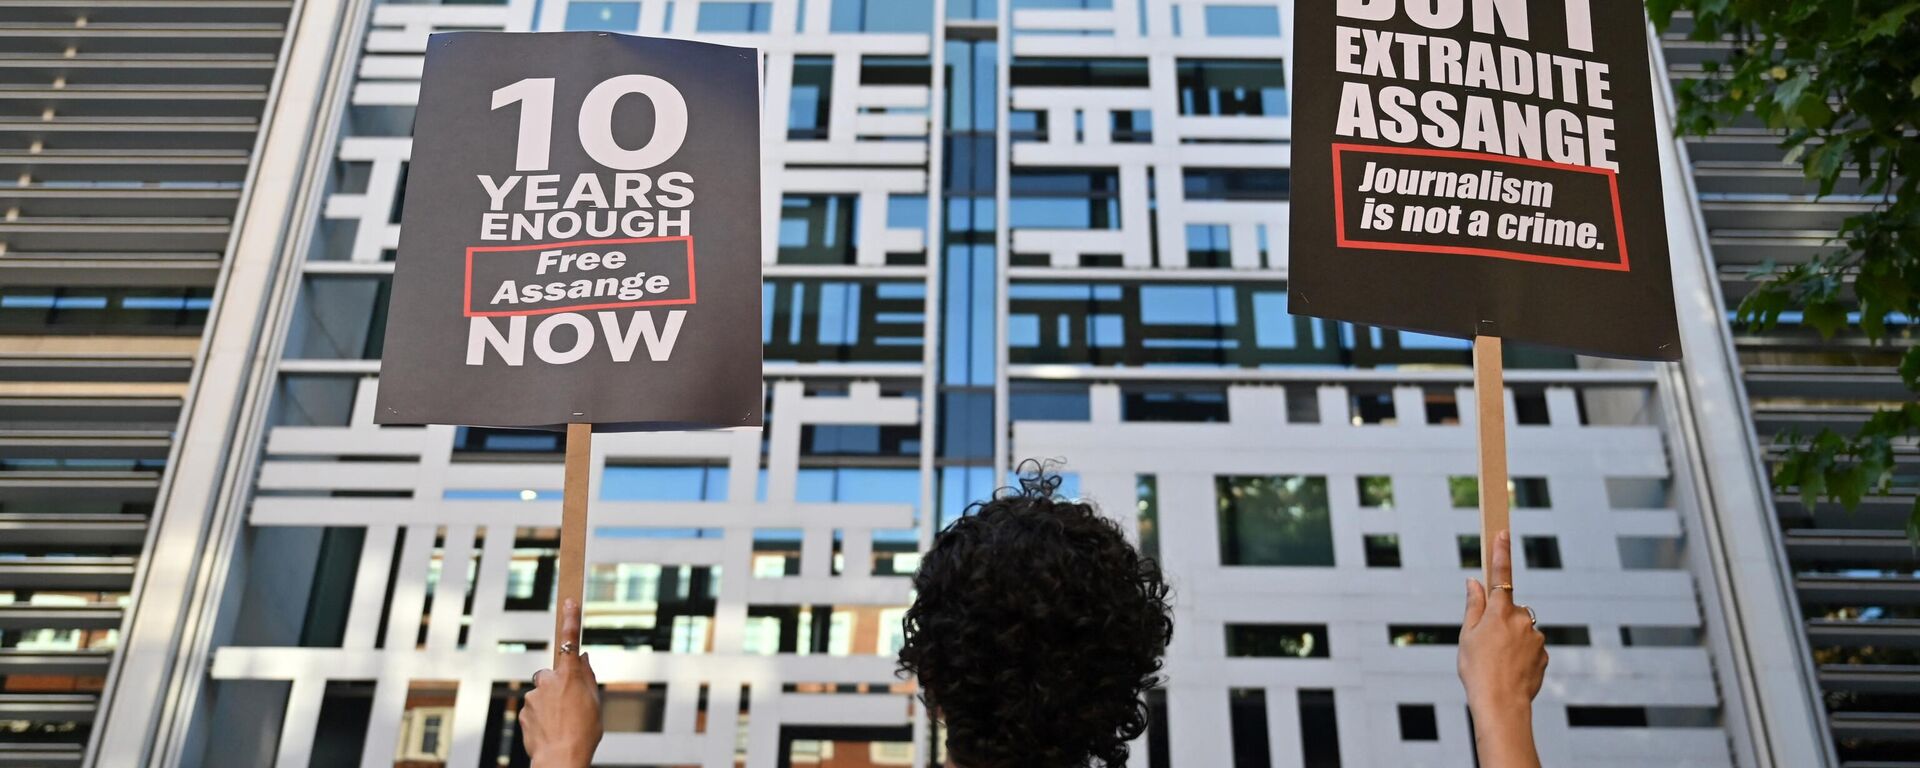 A demonstrator holds two placards while standing in front of Home Office building, in London, on May 17, 2022, to protest against the extradition of Wikileaks founder Julian Assange. - Sputnik International, 1920, 17.05.2022